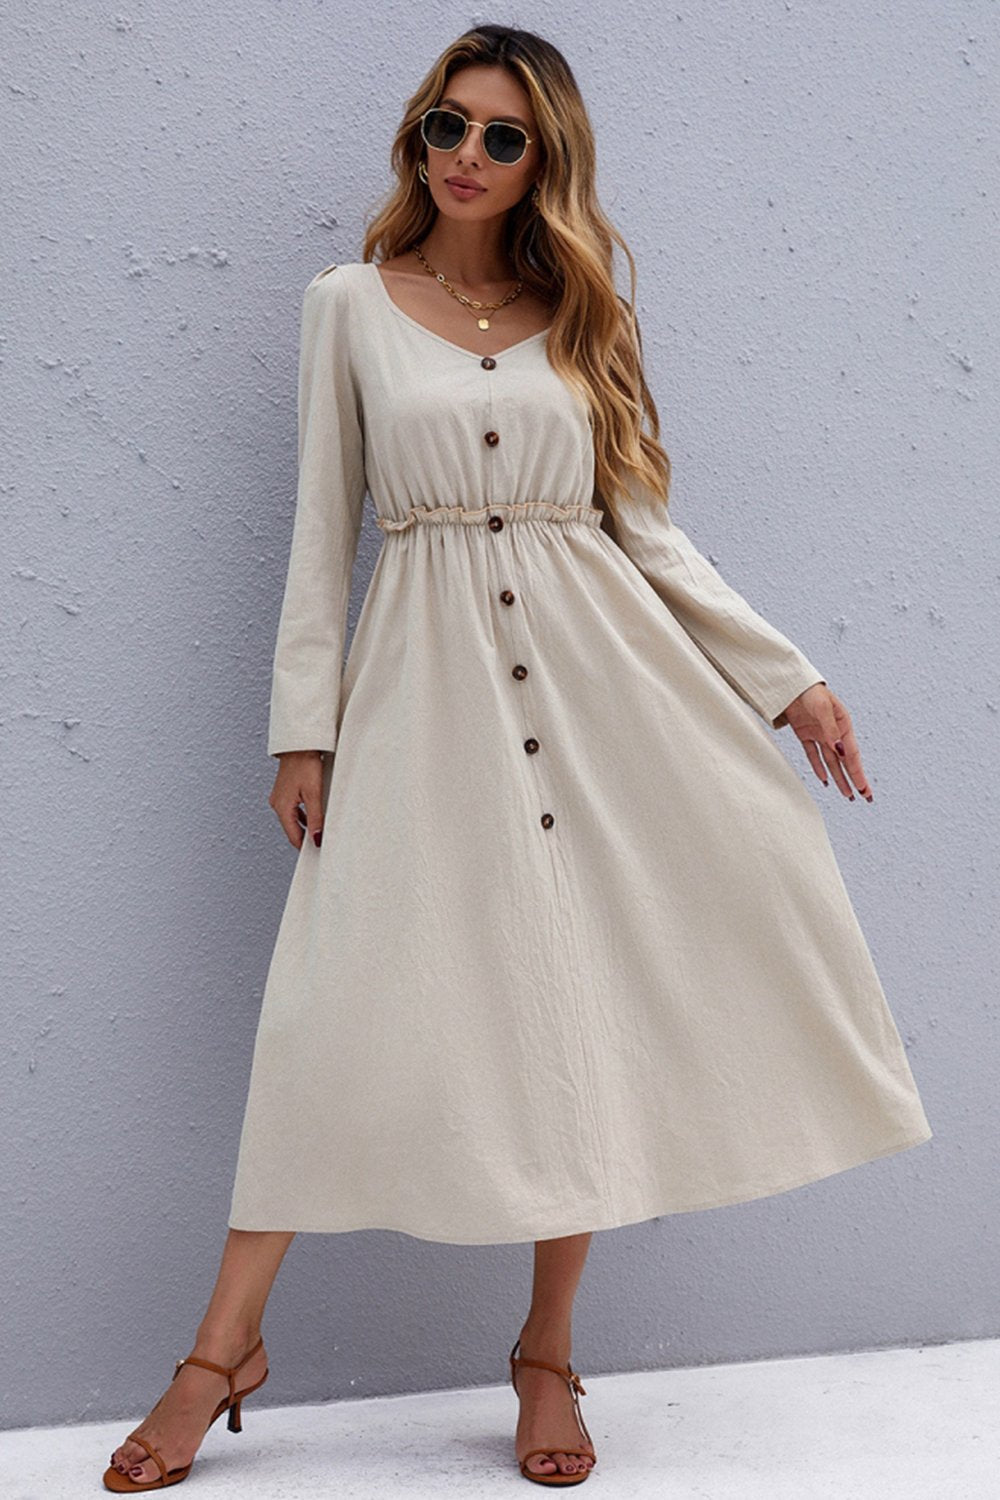 Long-Sleeved Solid Color Waist A-Line Maxi Dress